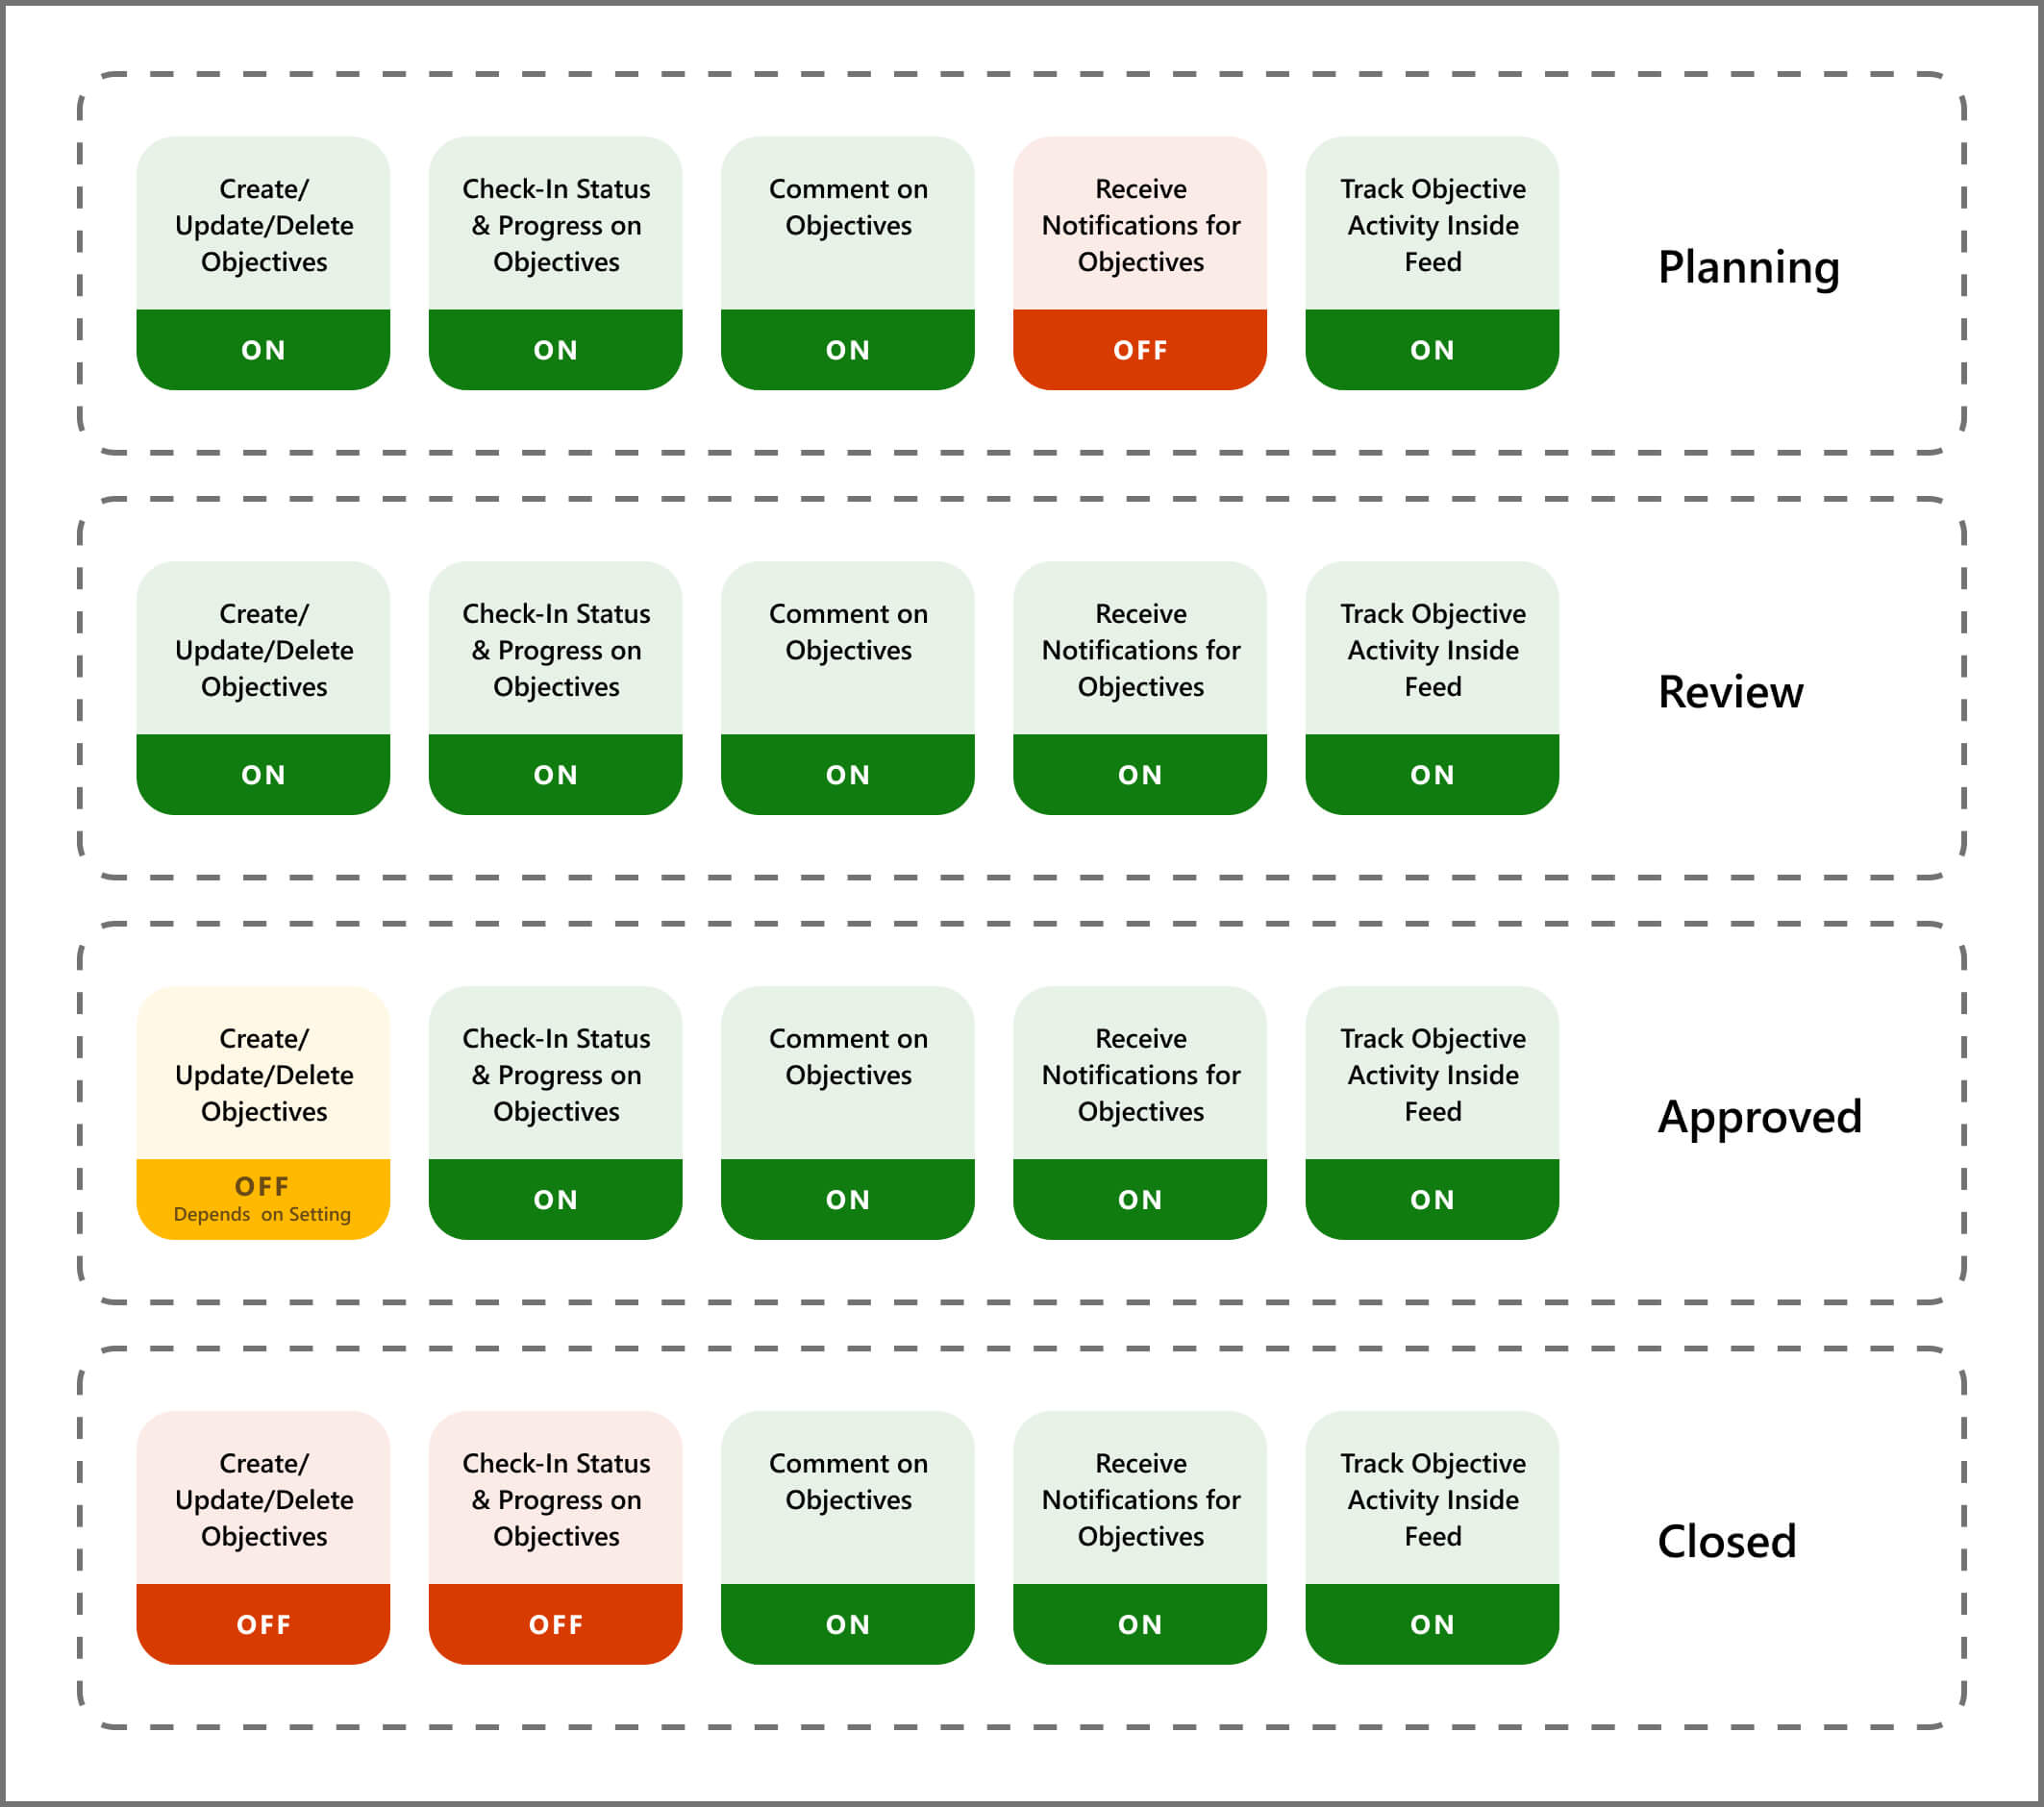 Chart shows the steps in each stage of OKR approval.